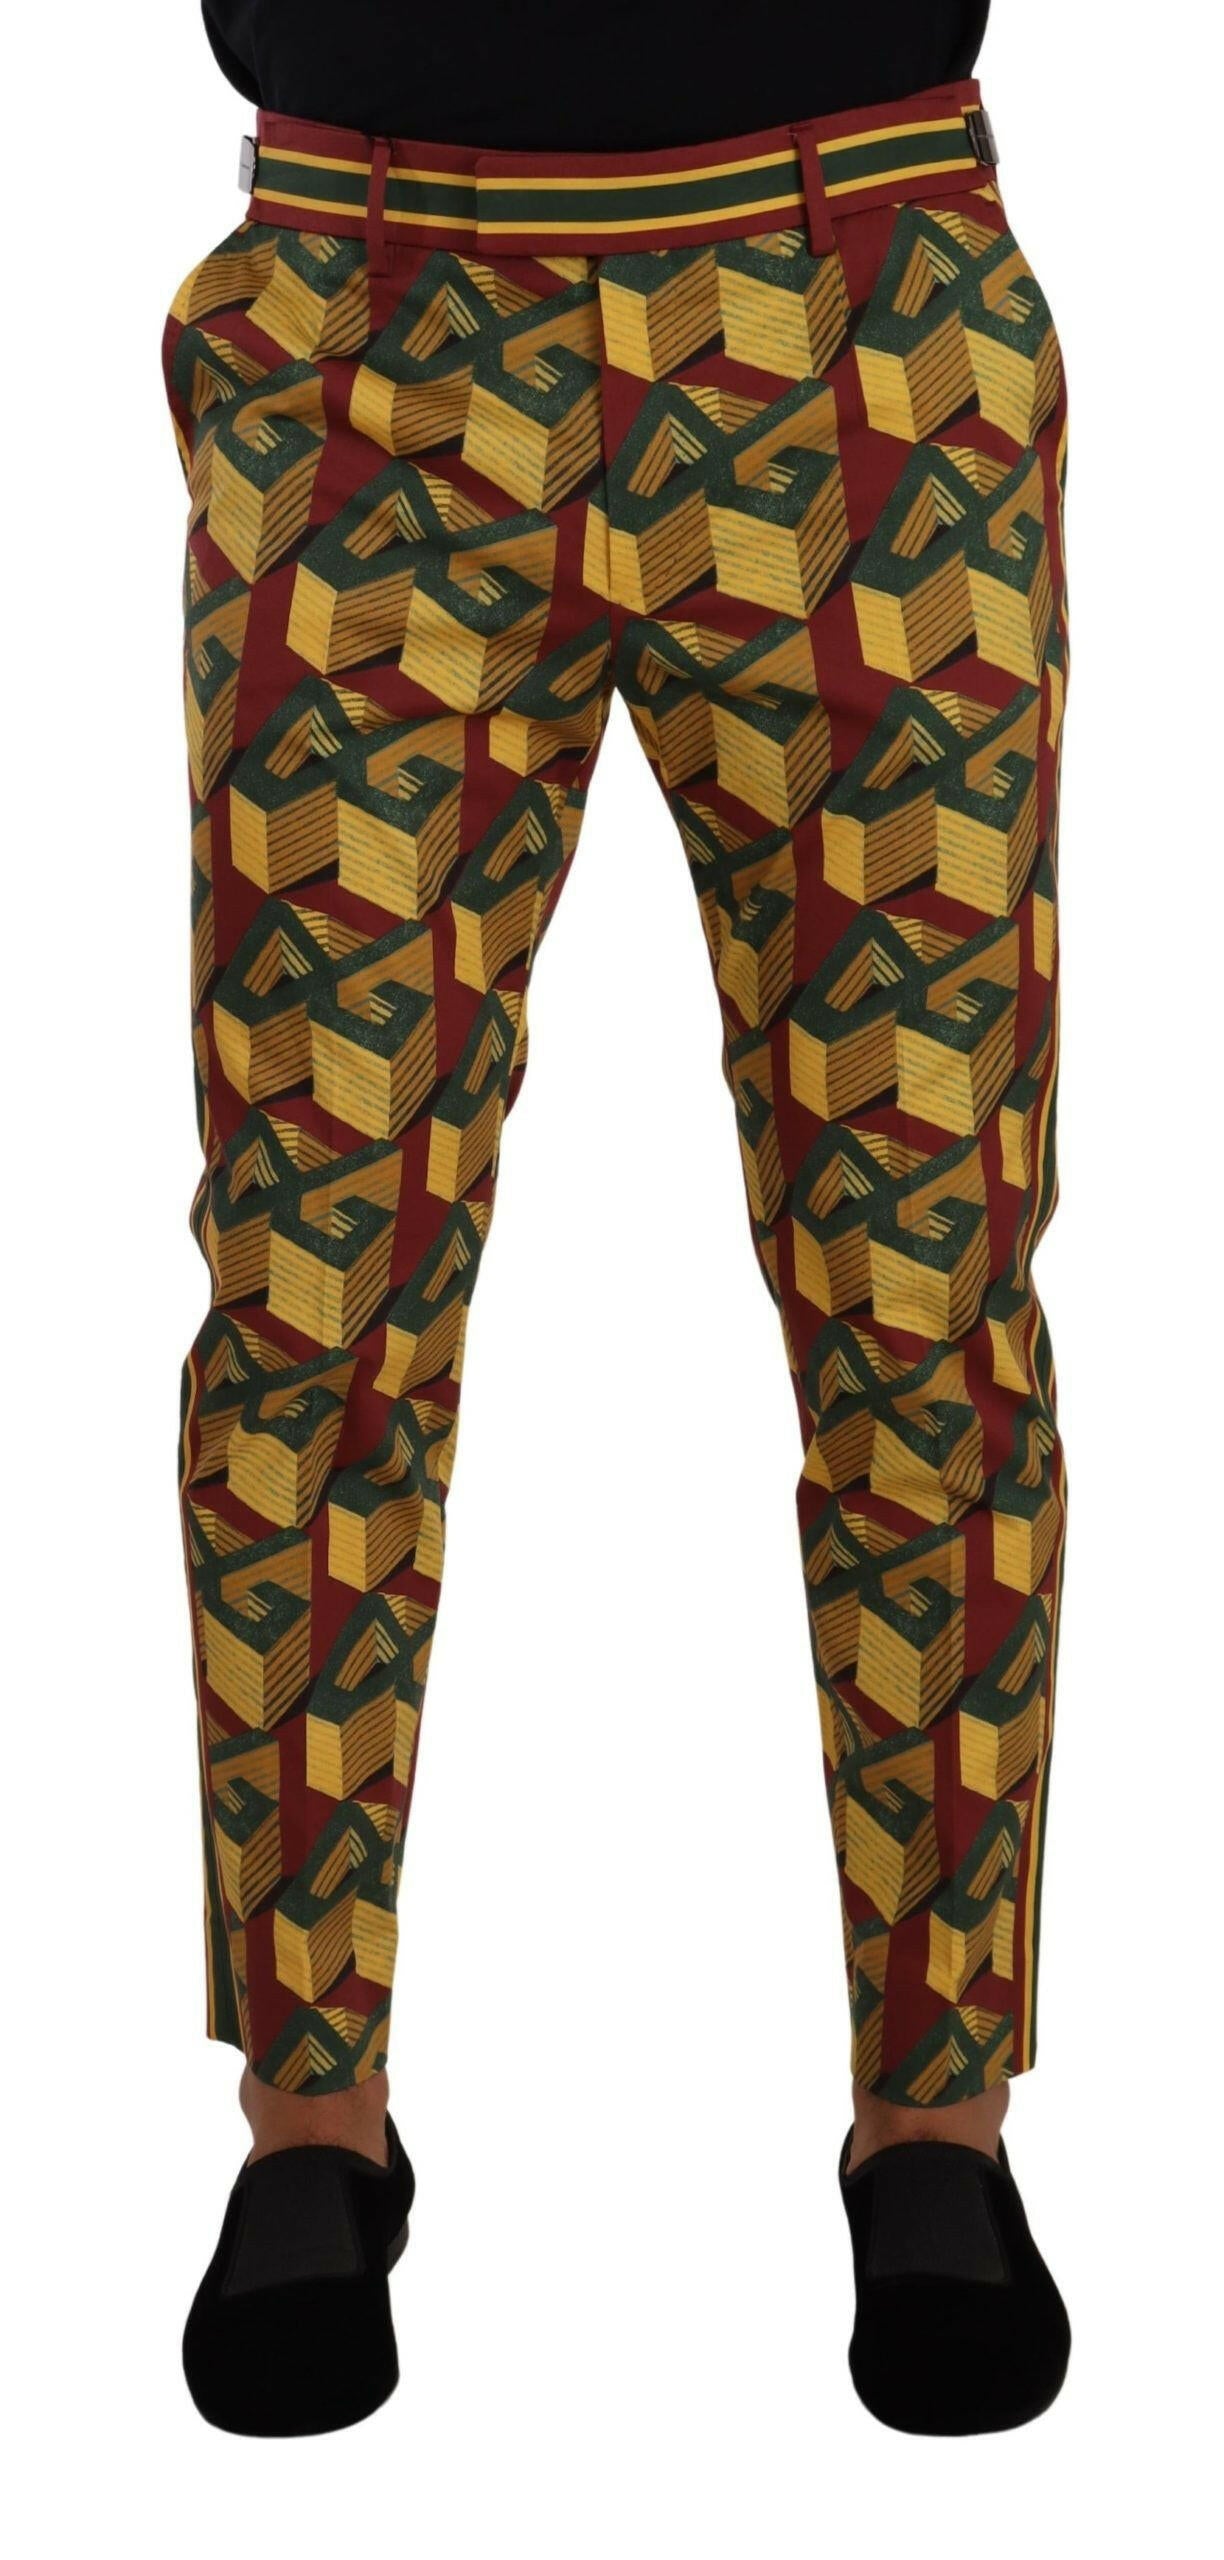 Dolce & Gabbana Multicolor Logo Mania Cotton Tapered Trouser Pants - GENUINE AUTHENTIC BRAND LLC  